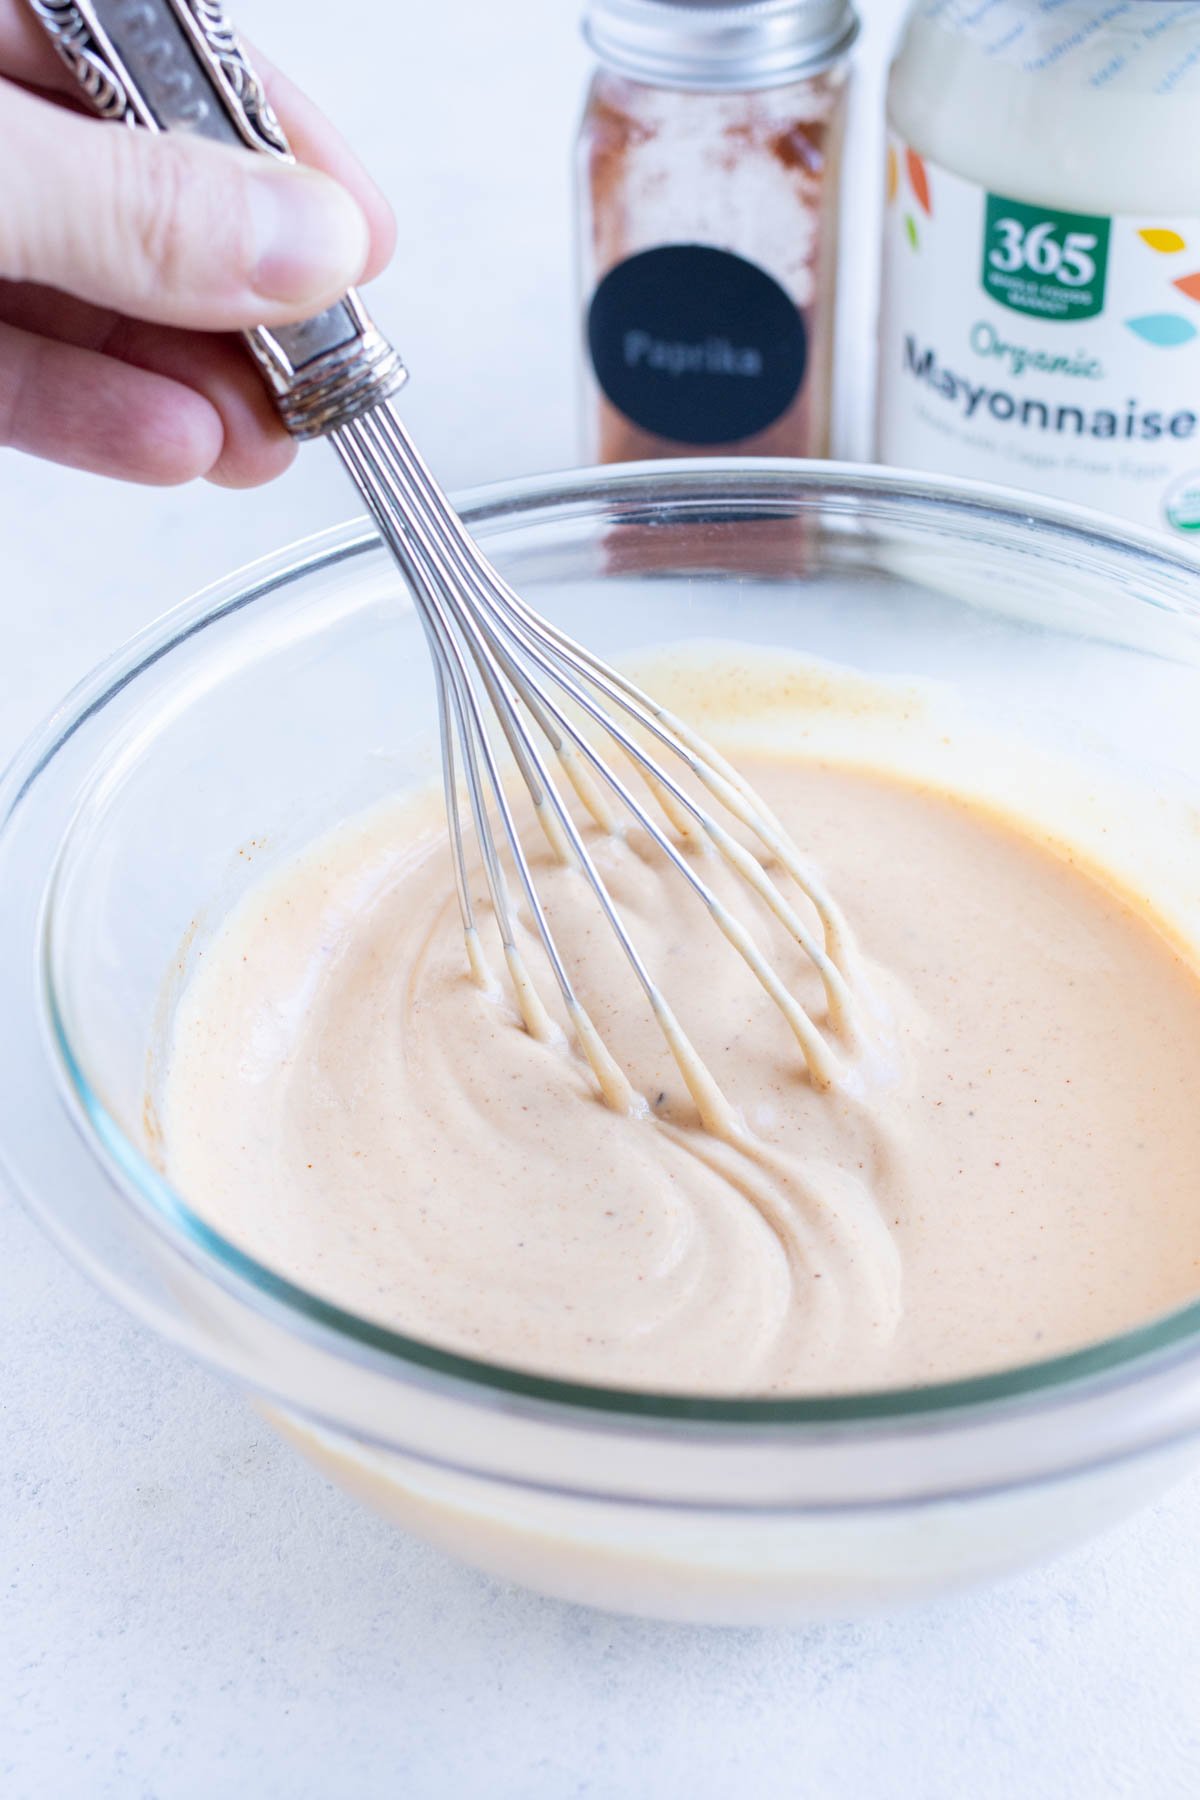 Creamy sauce is whisked together in a glass bowl.